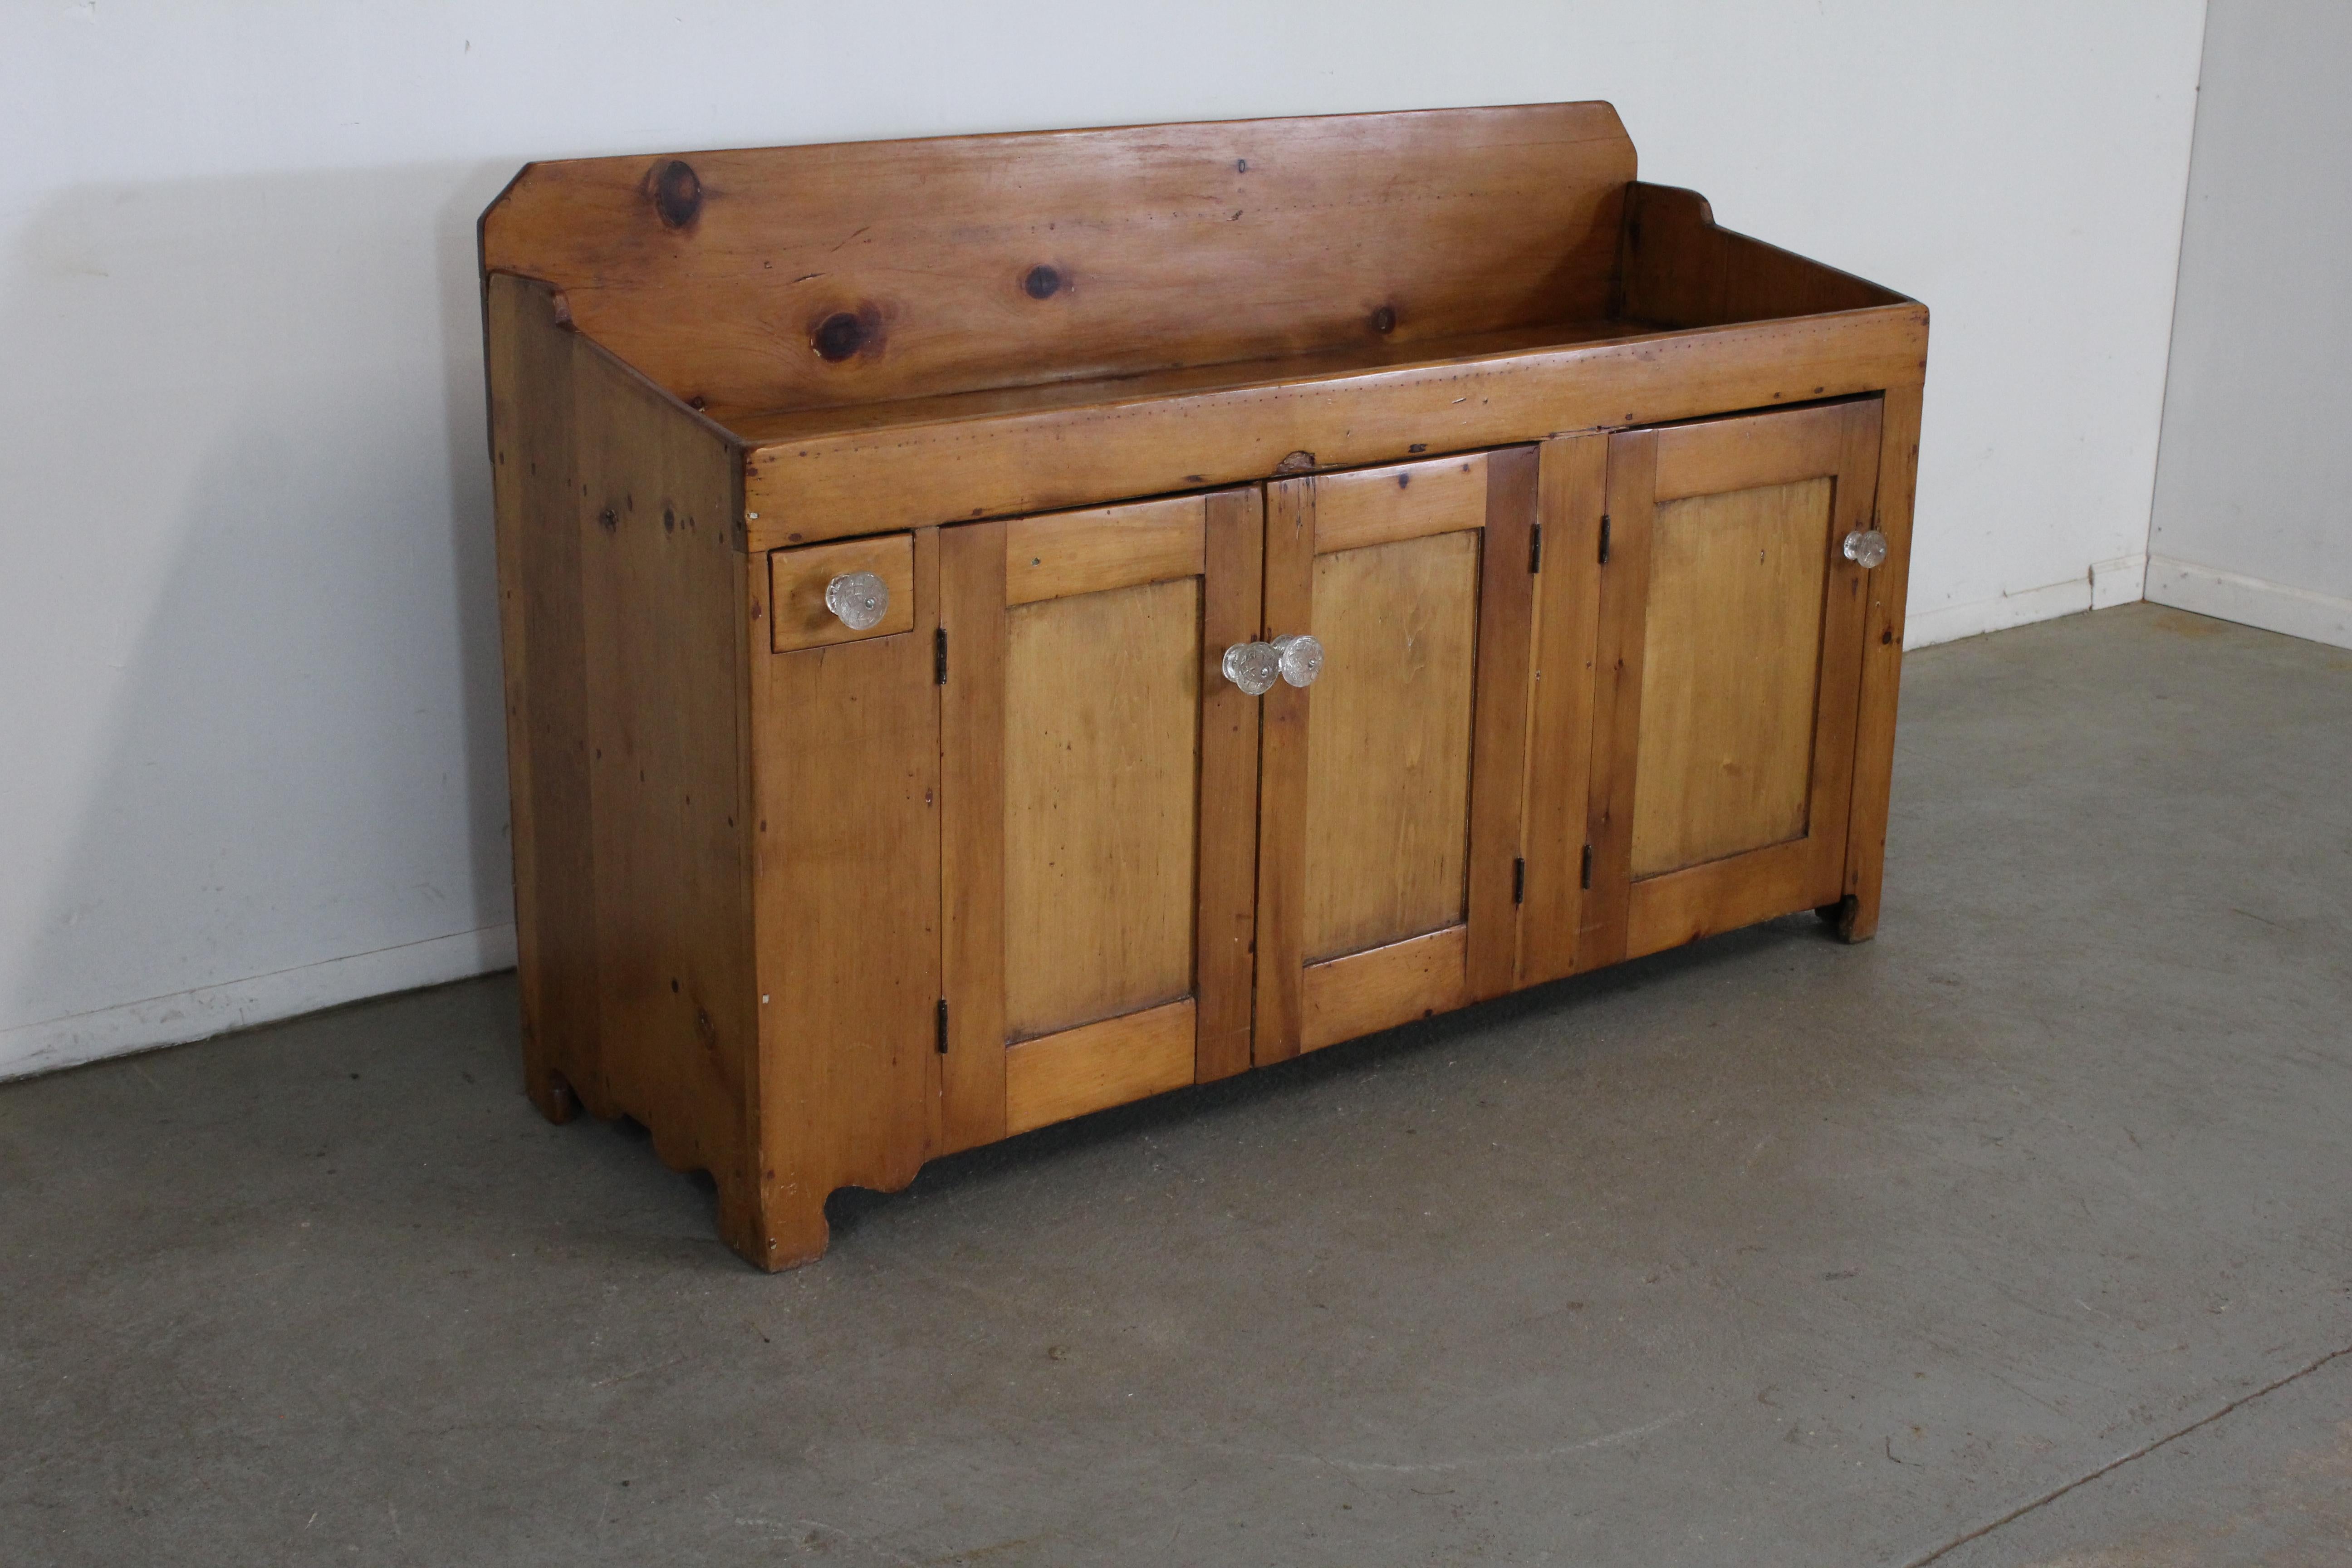 Offered is a solid Pine wood Antique Country Elongated dry sink. We estimate his to be from the mid to late 1800's. It features 1 small drawer and 3 doors with loads of storage. This piece has been in our personal home for the last 15 years. We have